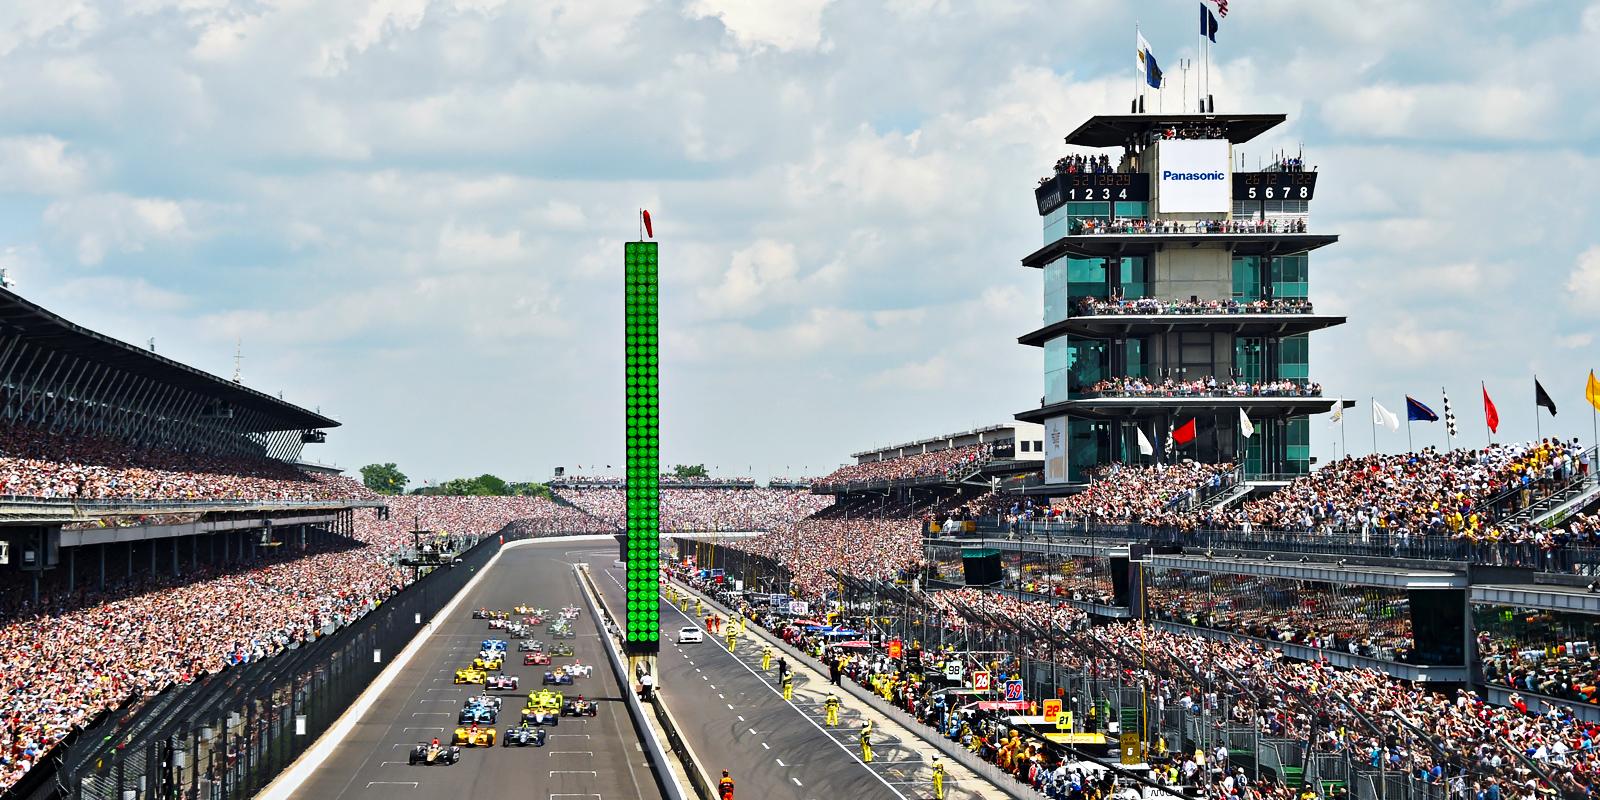 Indianapolis Motor Speedway (Indiana State), The Highest Capacity